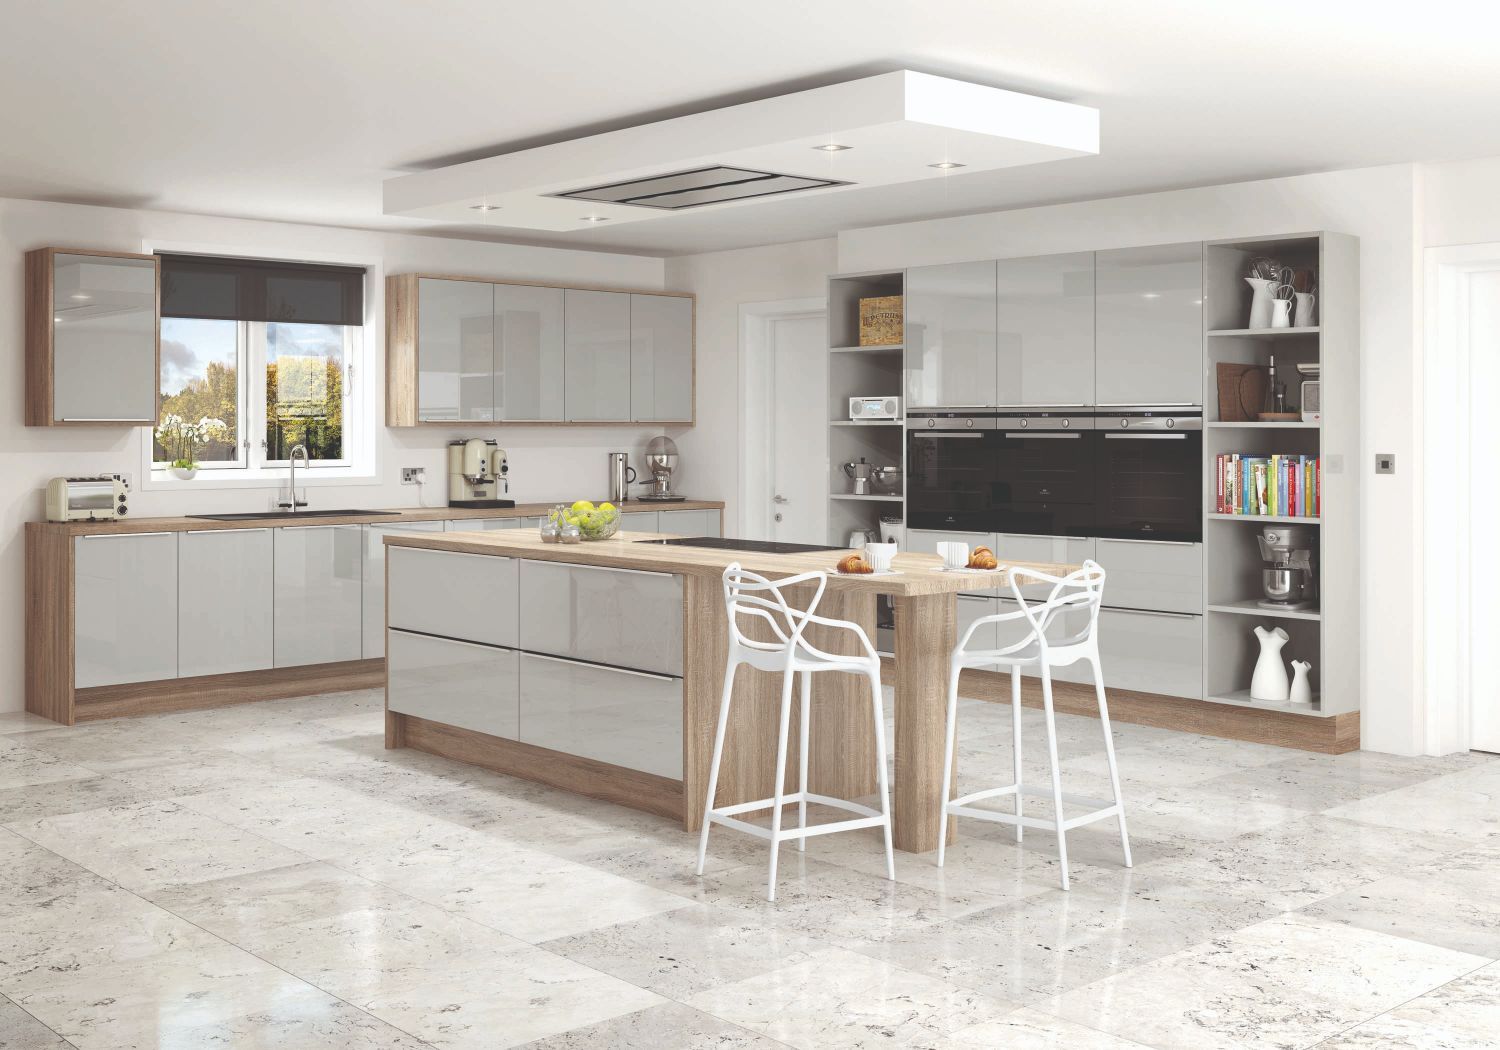 Stunning New Kitchens in Bacup | Rossendale Interiors